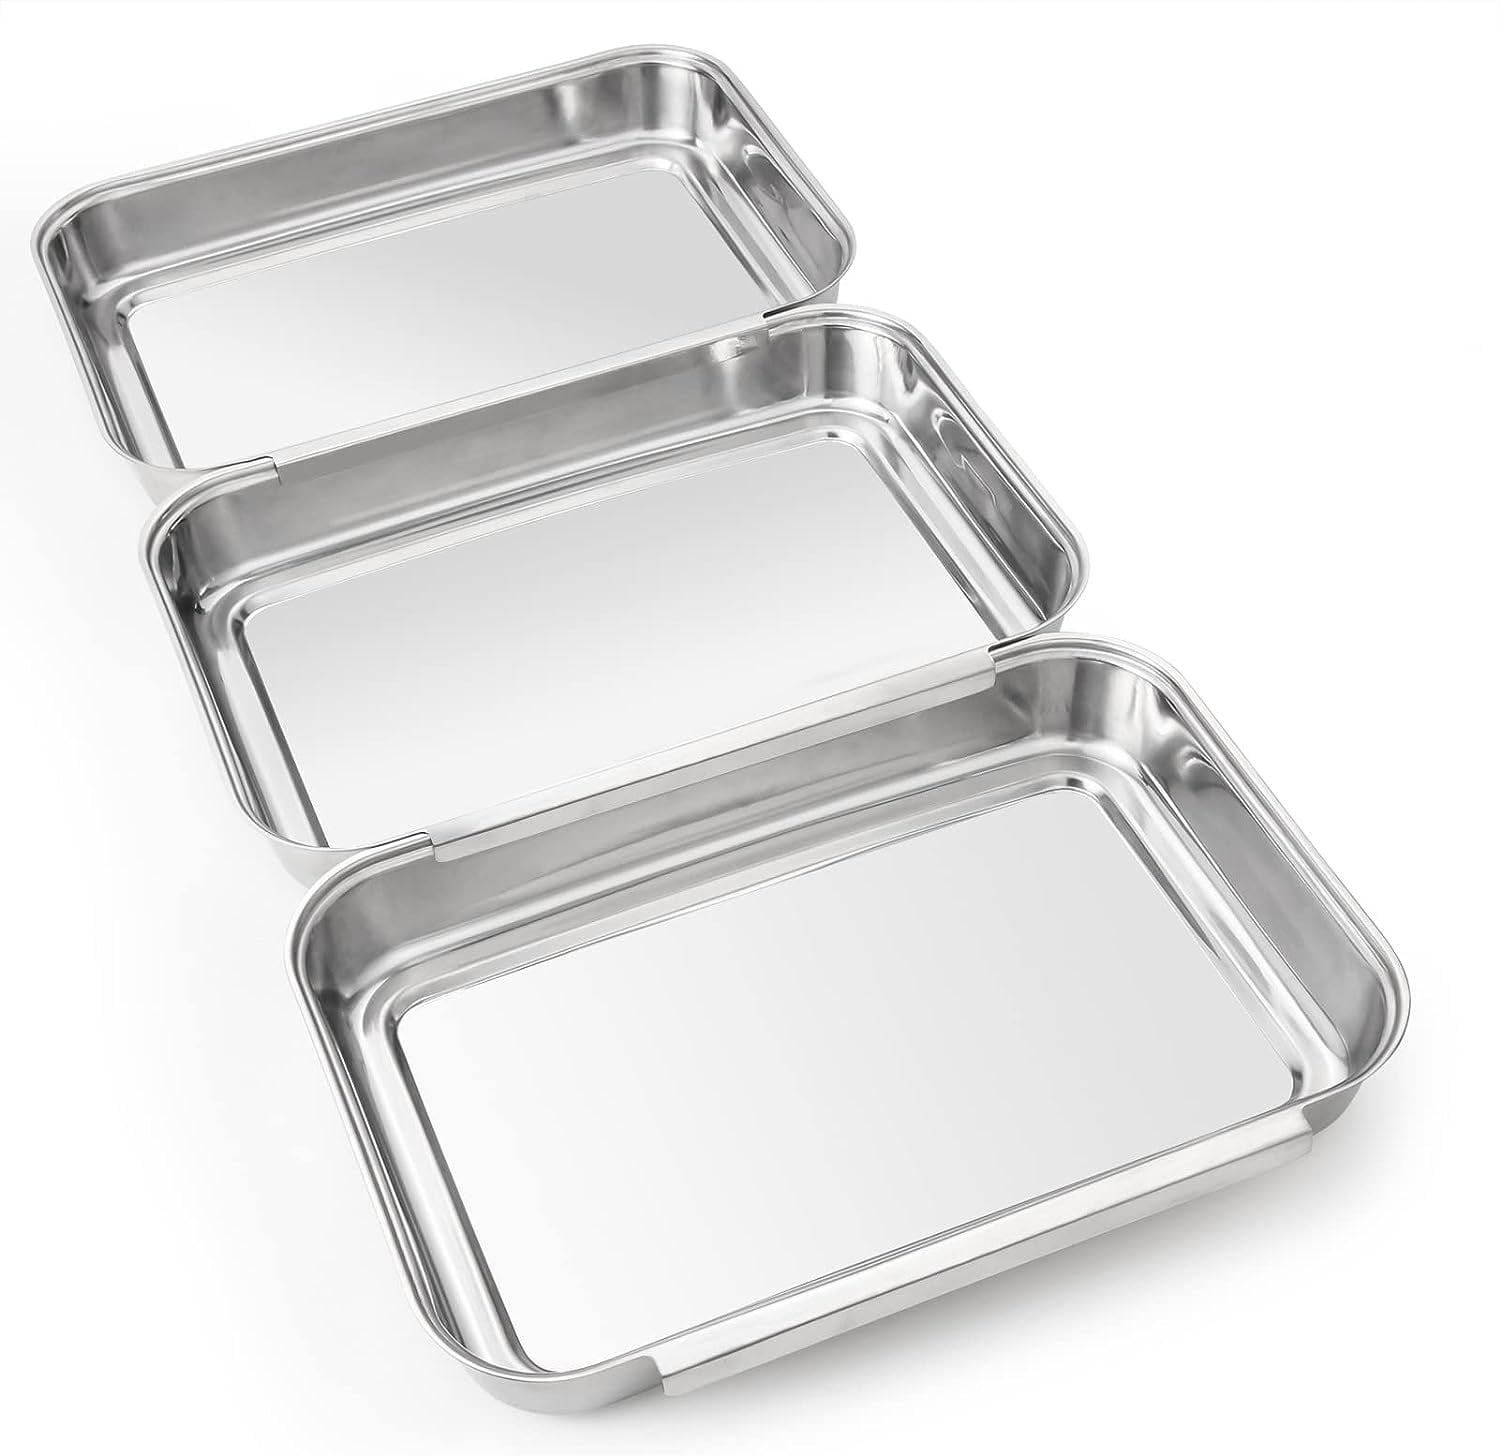 Mumufy Breading Trays Set of 3 Large Stainless Steel Breading Pans with  Tong for Dredging Chicken Breasts and Marinating Meat, Food Prep Trays for